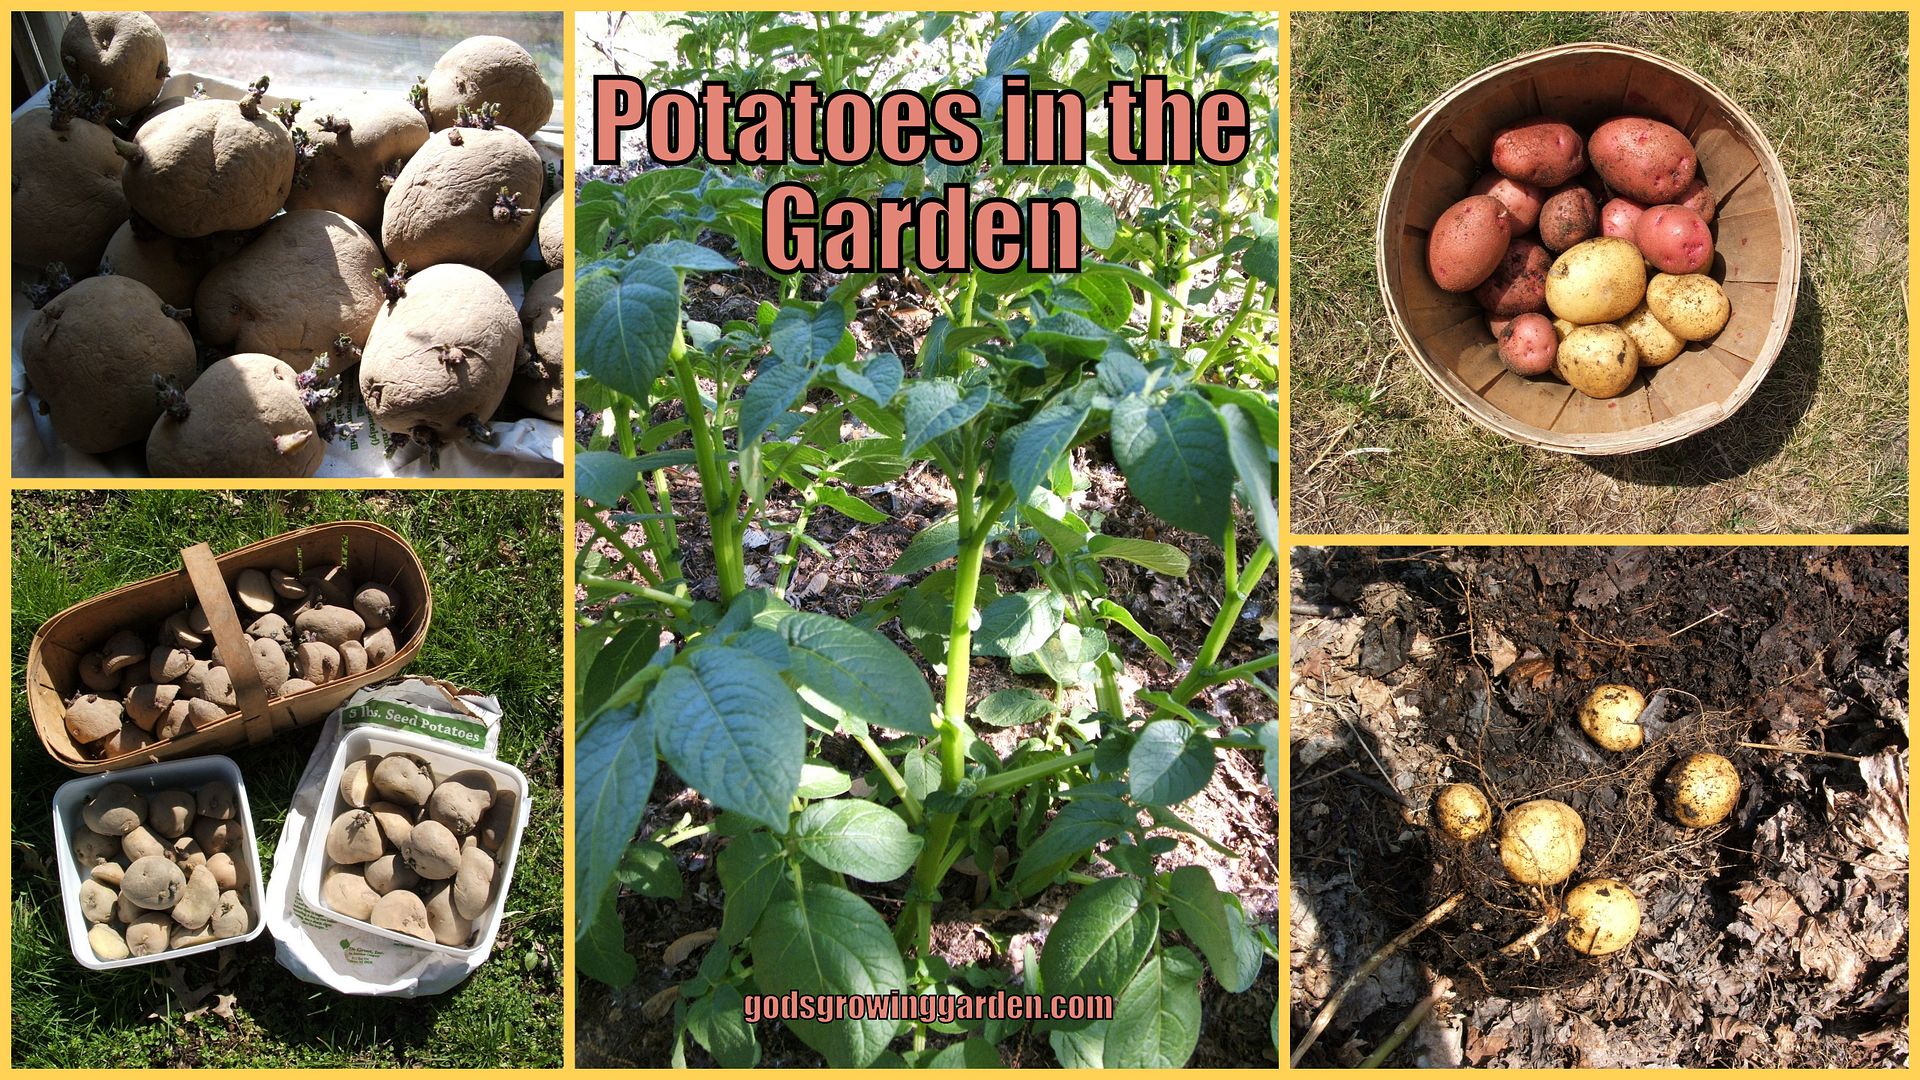 Potatoes by Angie Ouellette-Tower for godsgrowinggarden.com photo 2013-10-31_zpsaa16a33d.jpg